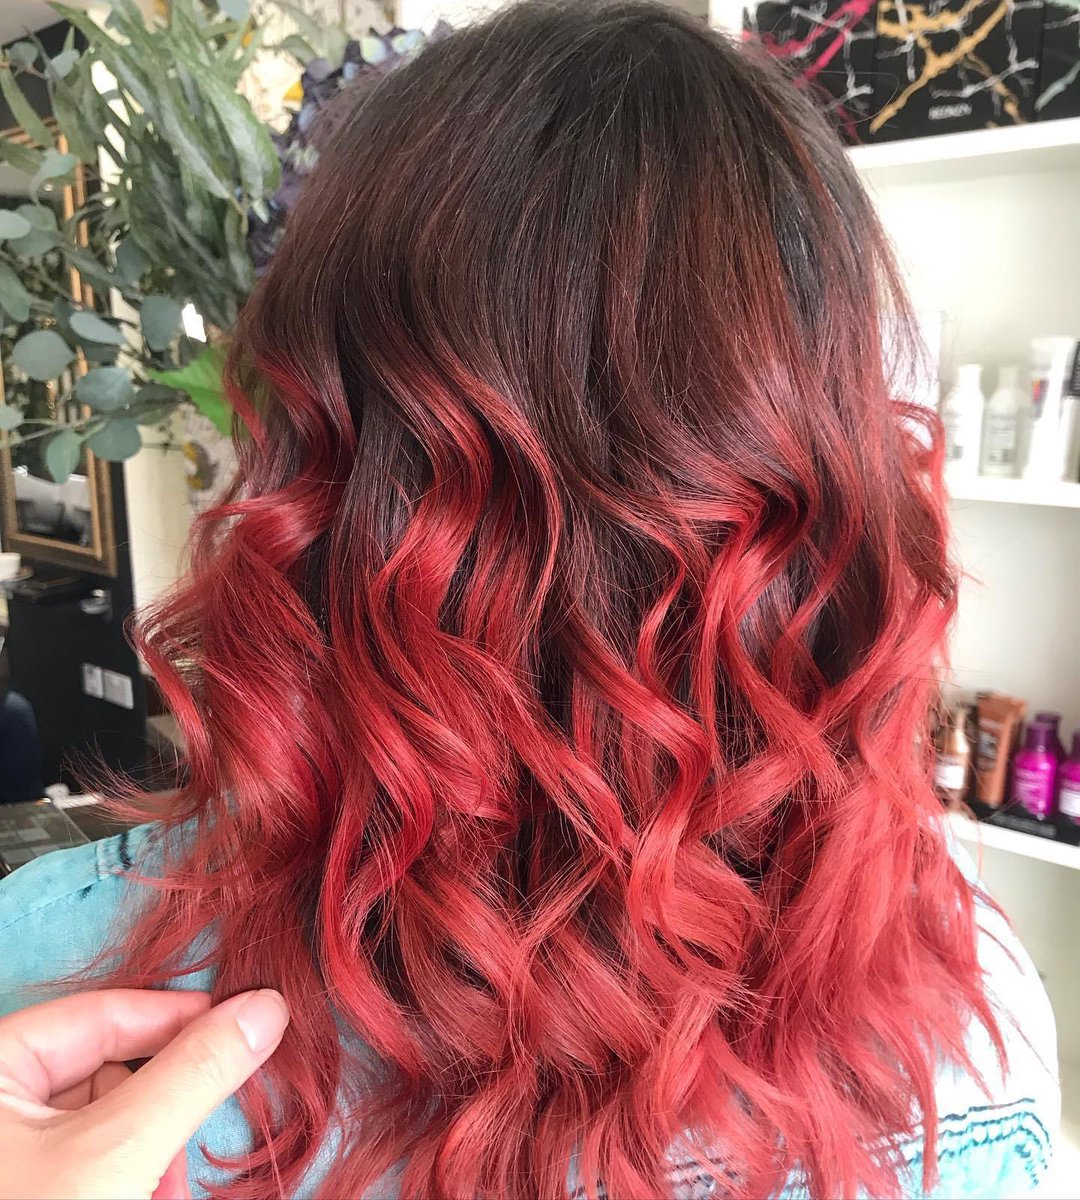 Hair glow-up alert! 💥vibrant red copper 💥 is your hair ready for summer ? ☀️ Stunning red with darker root melt to add depth and reduce comment …. 

#mandmhair #redhair #copperhair #hairinspo #summertrends #leicesterhair #festivalfashion #festivalhair